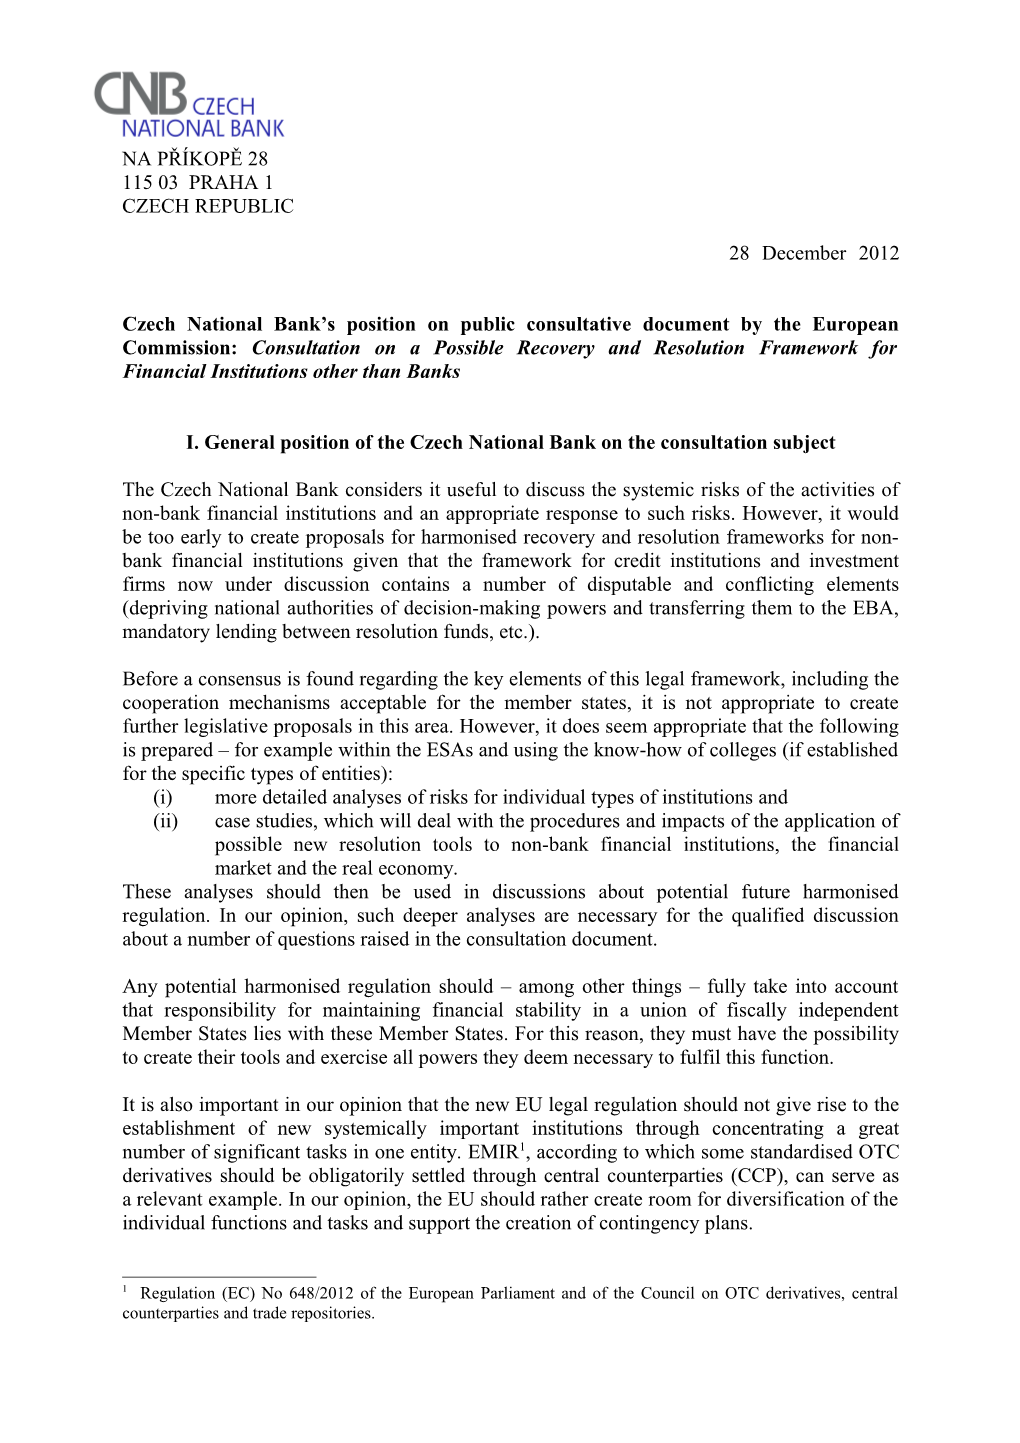 I. General Position of the Czech National Bank on the Consultation Subject